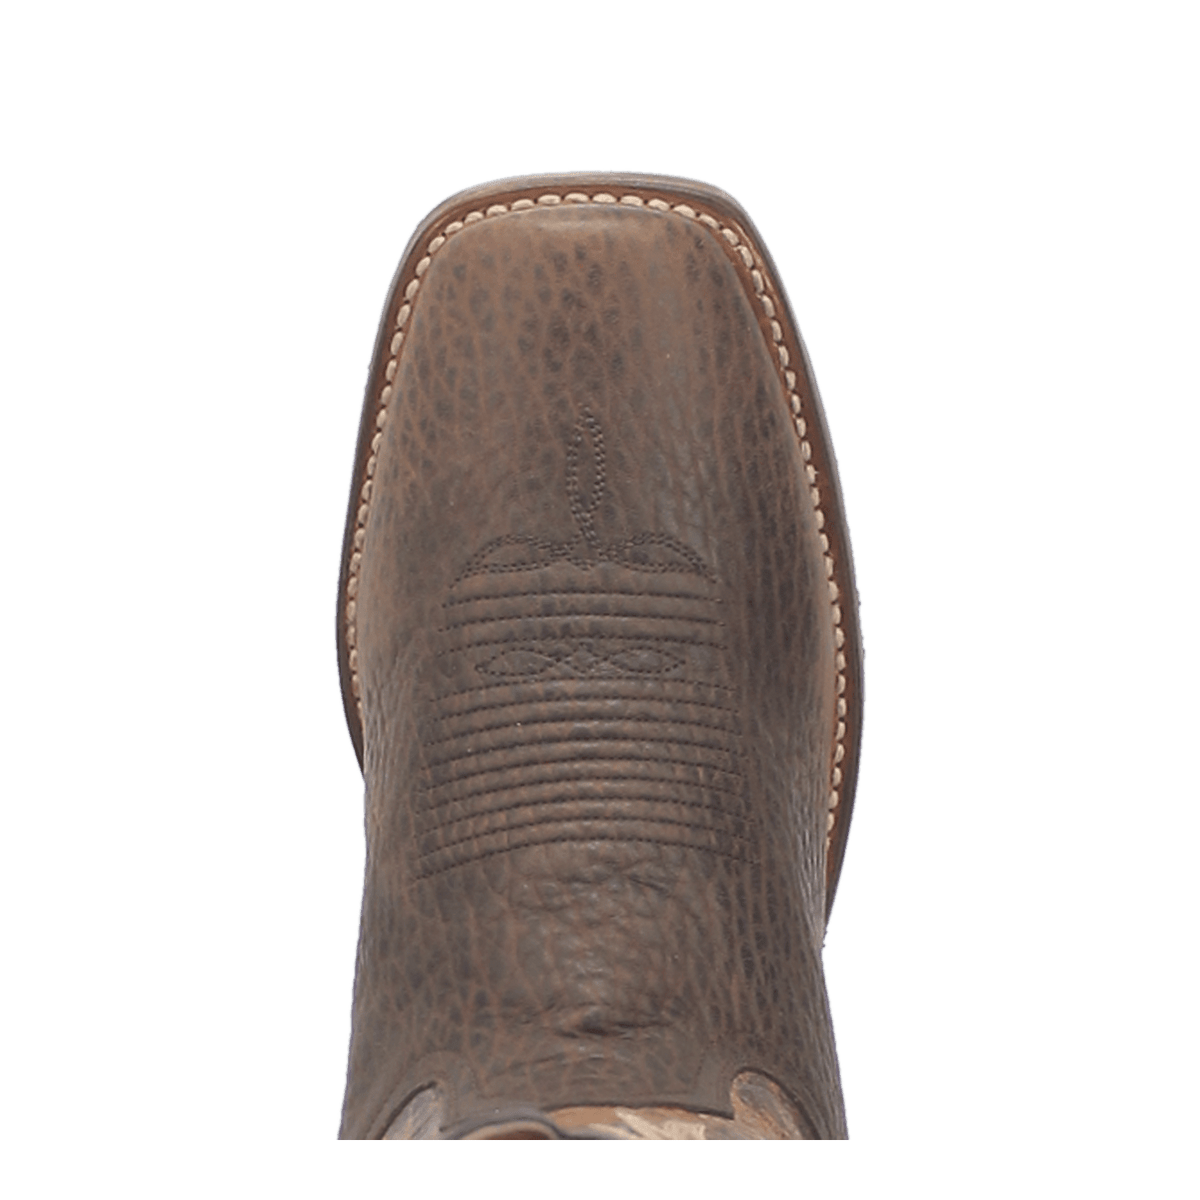 VINTAGE LEATHER BOOT Image